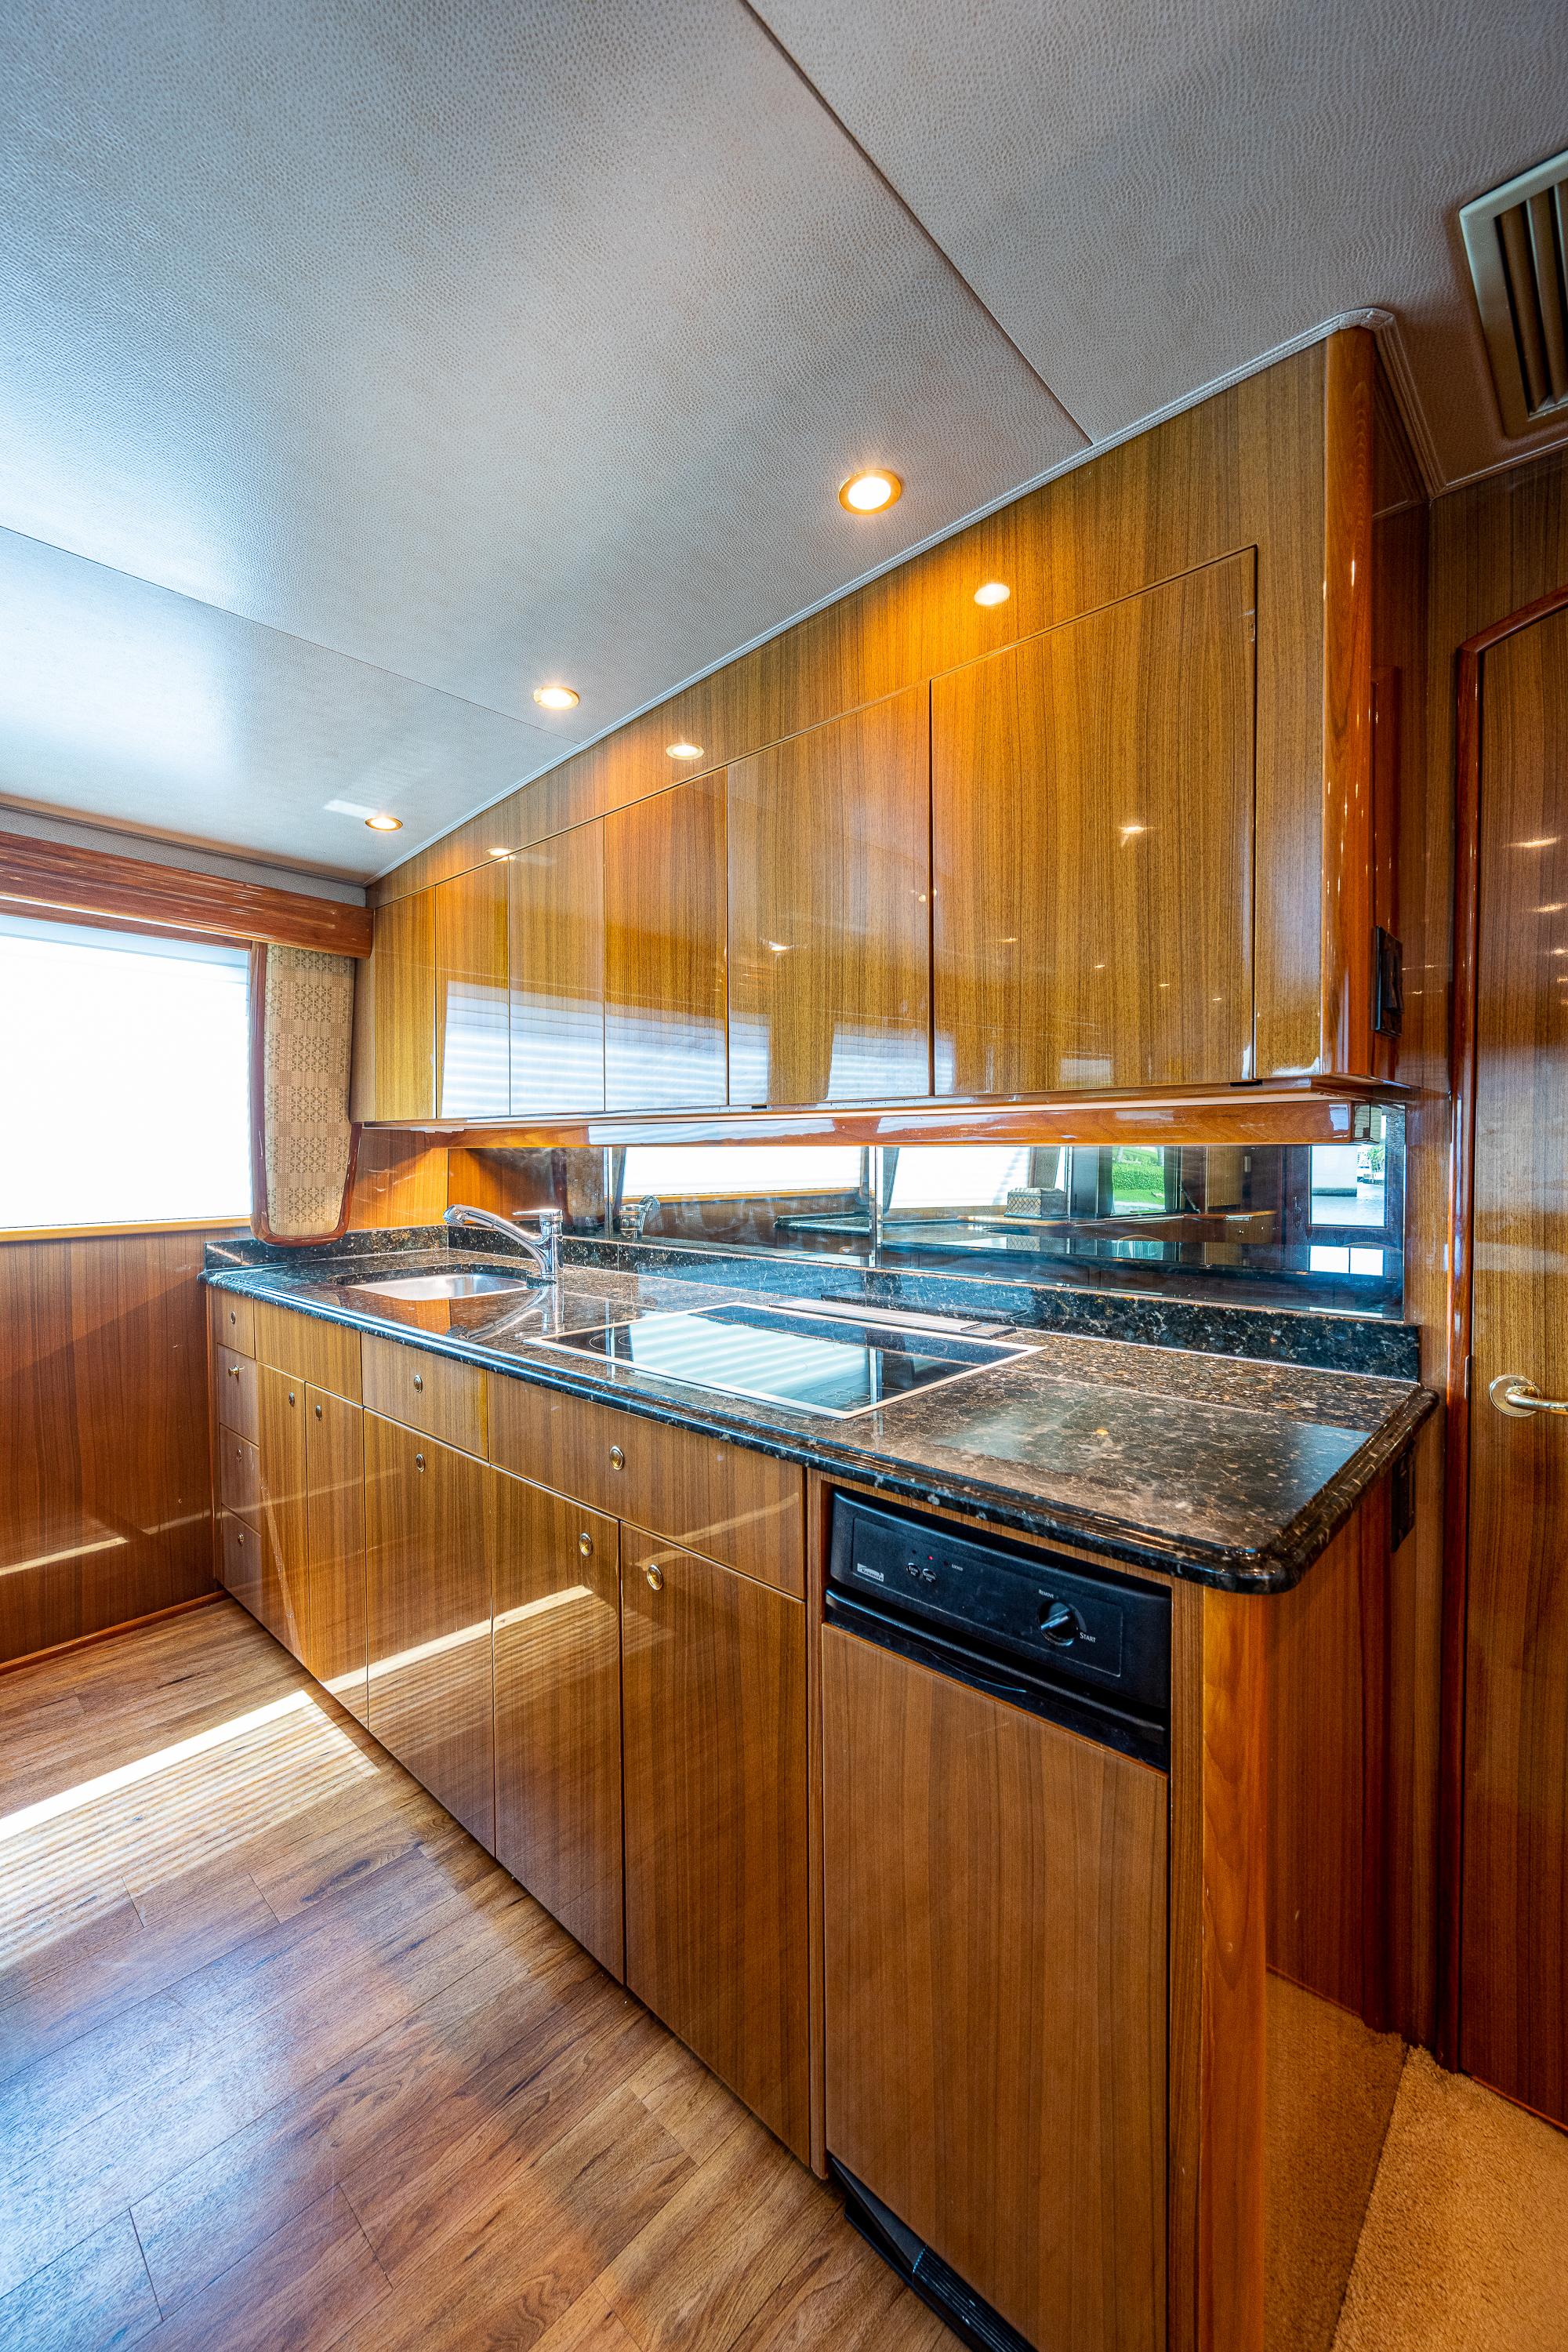 Viking 74 Convertible Reel Estate - Galley, Cooktop, Strage Cabinets